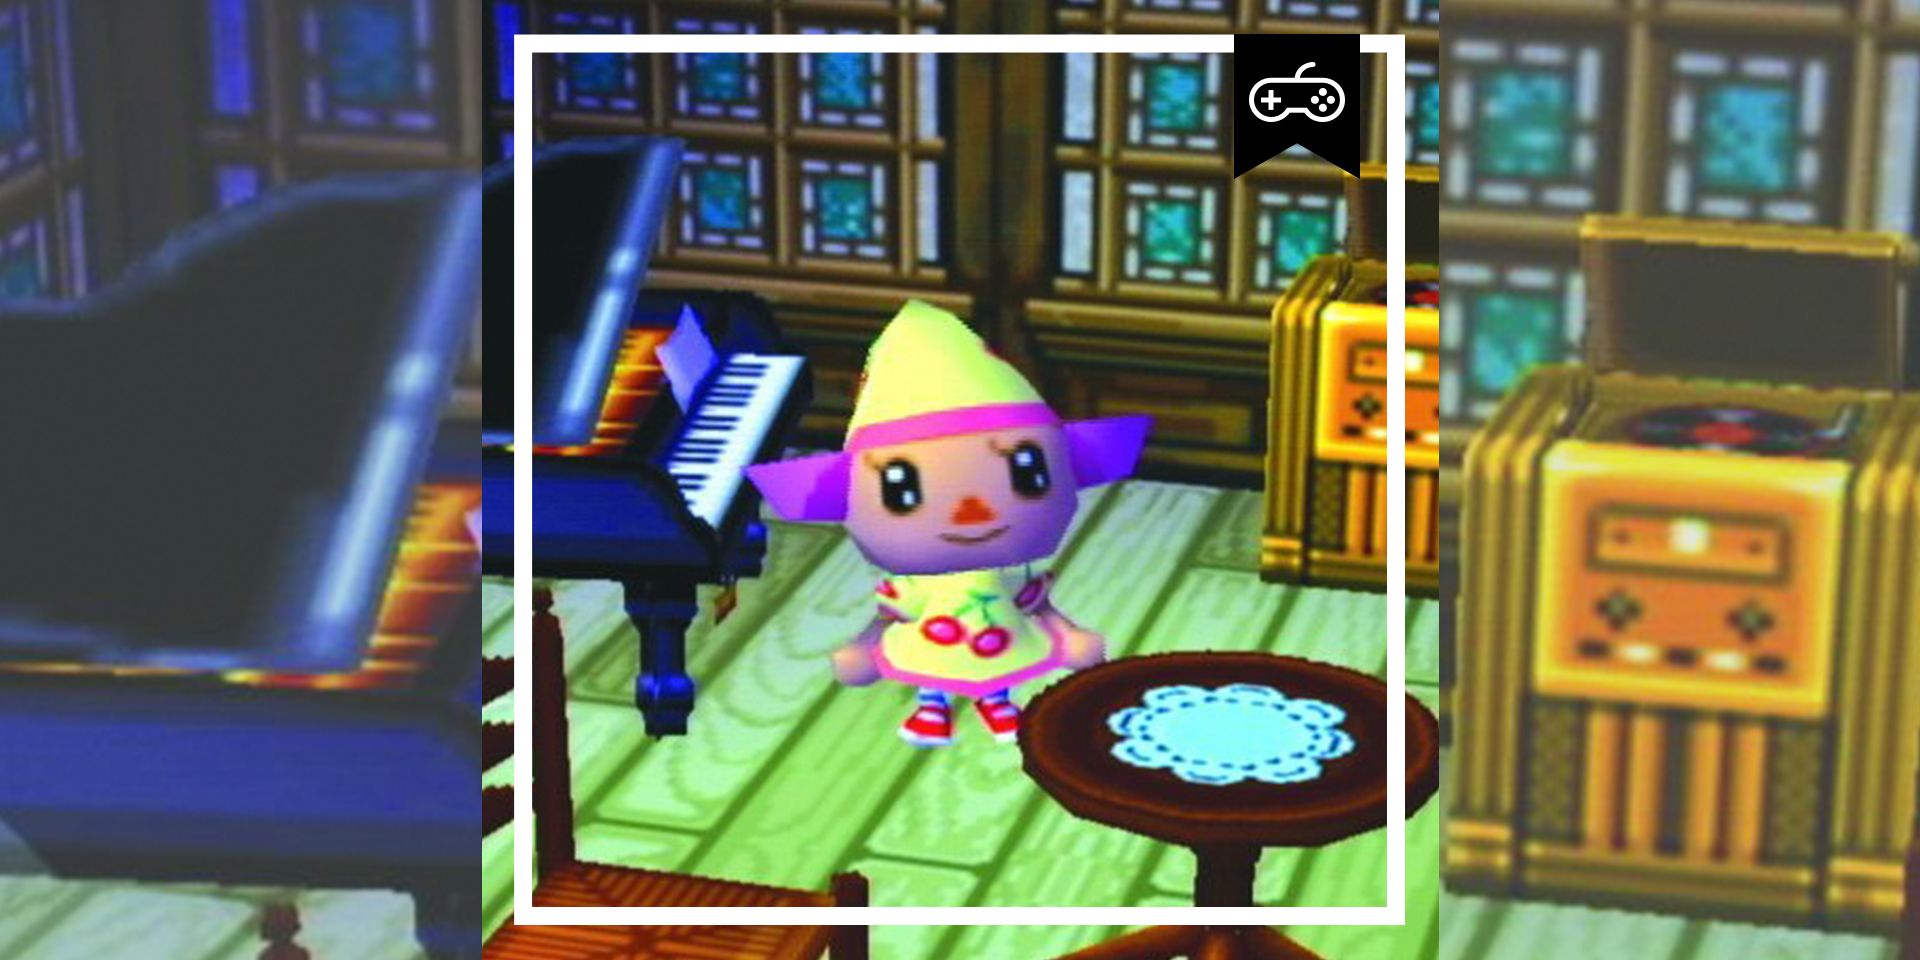 Best Part of Animal Crossing Release Is the Home Decorating Options